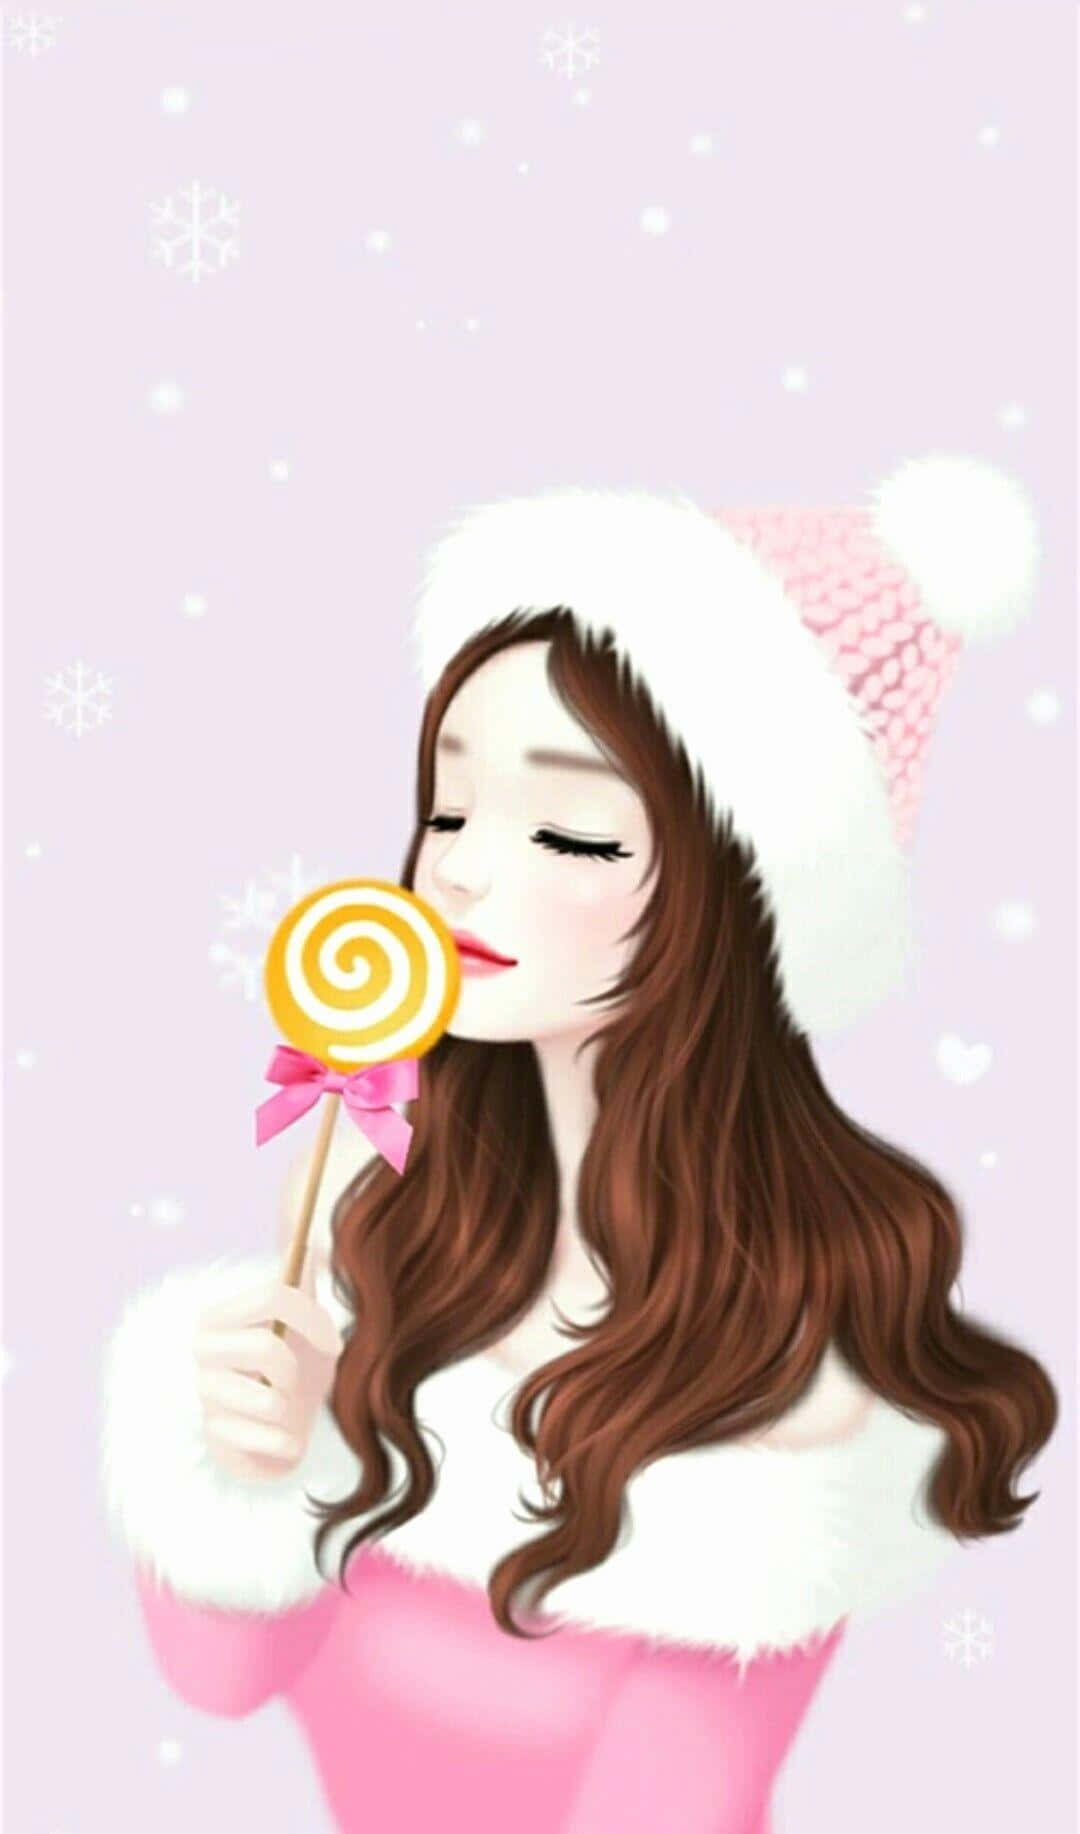 Korean Anime Girl In Pink And White Winter Outfit